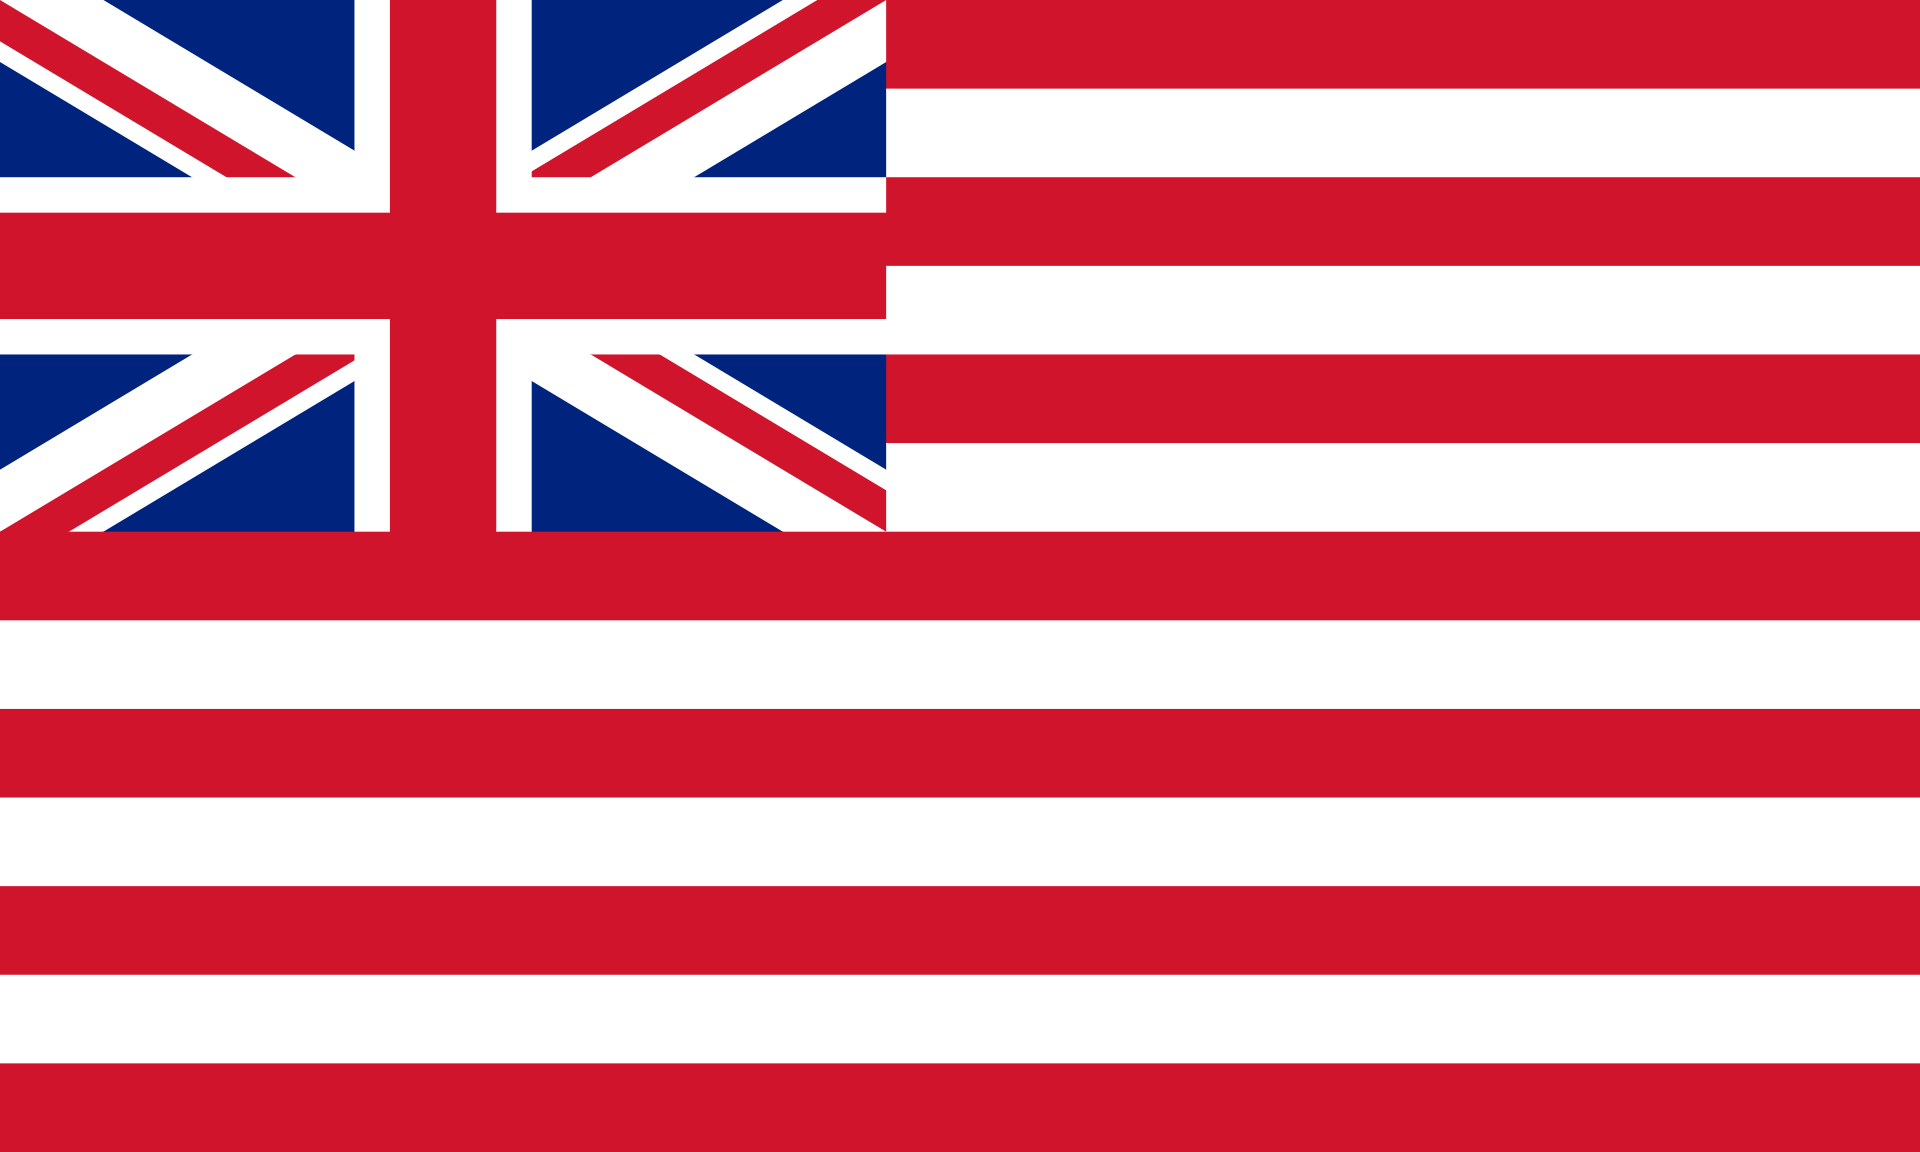 the flag of the East India Company